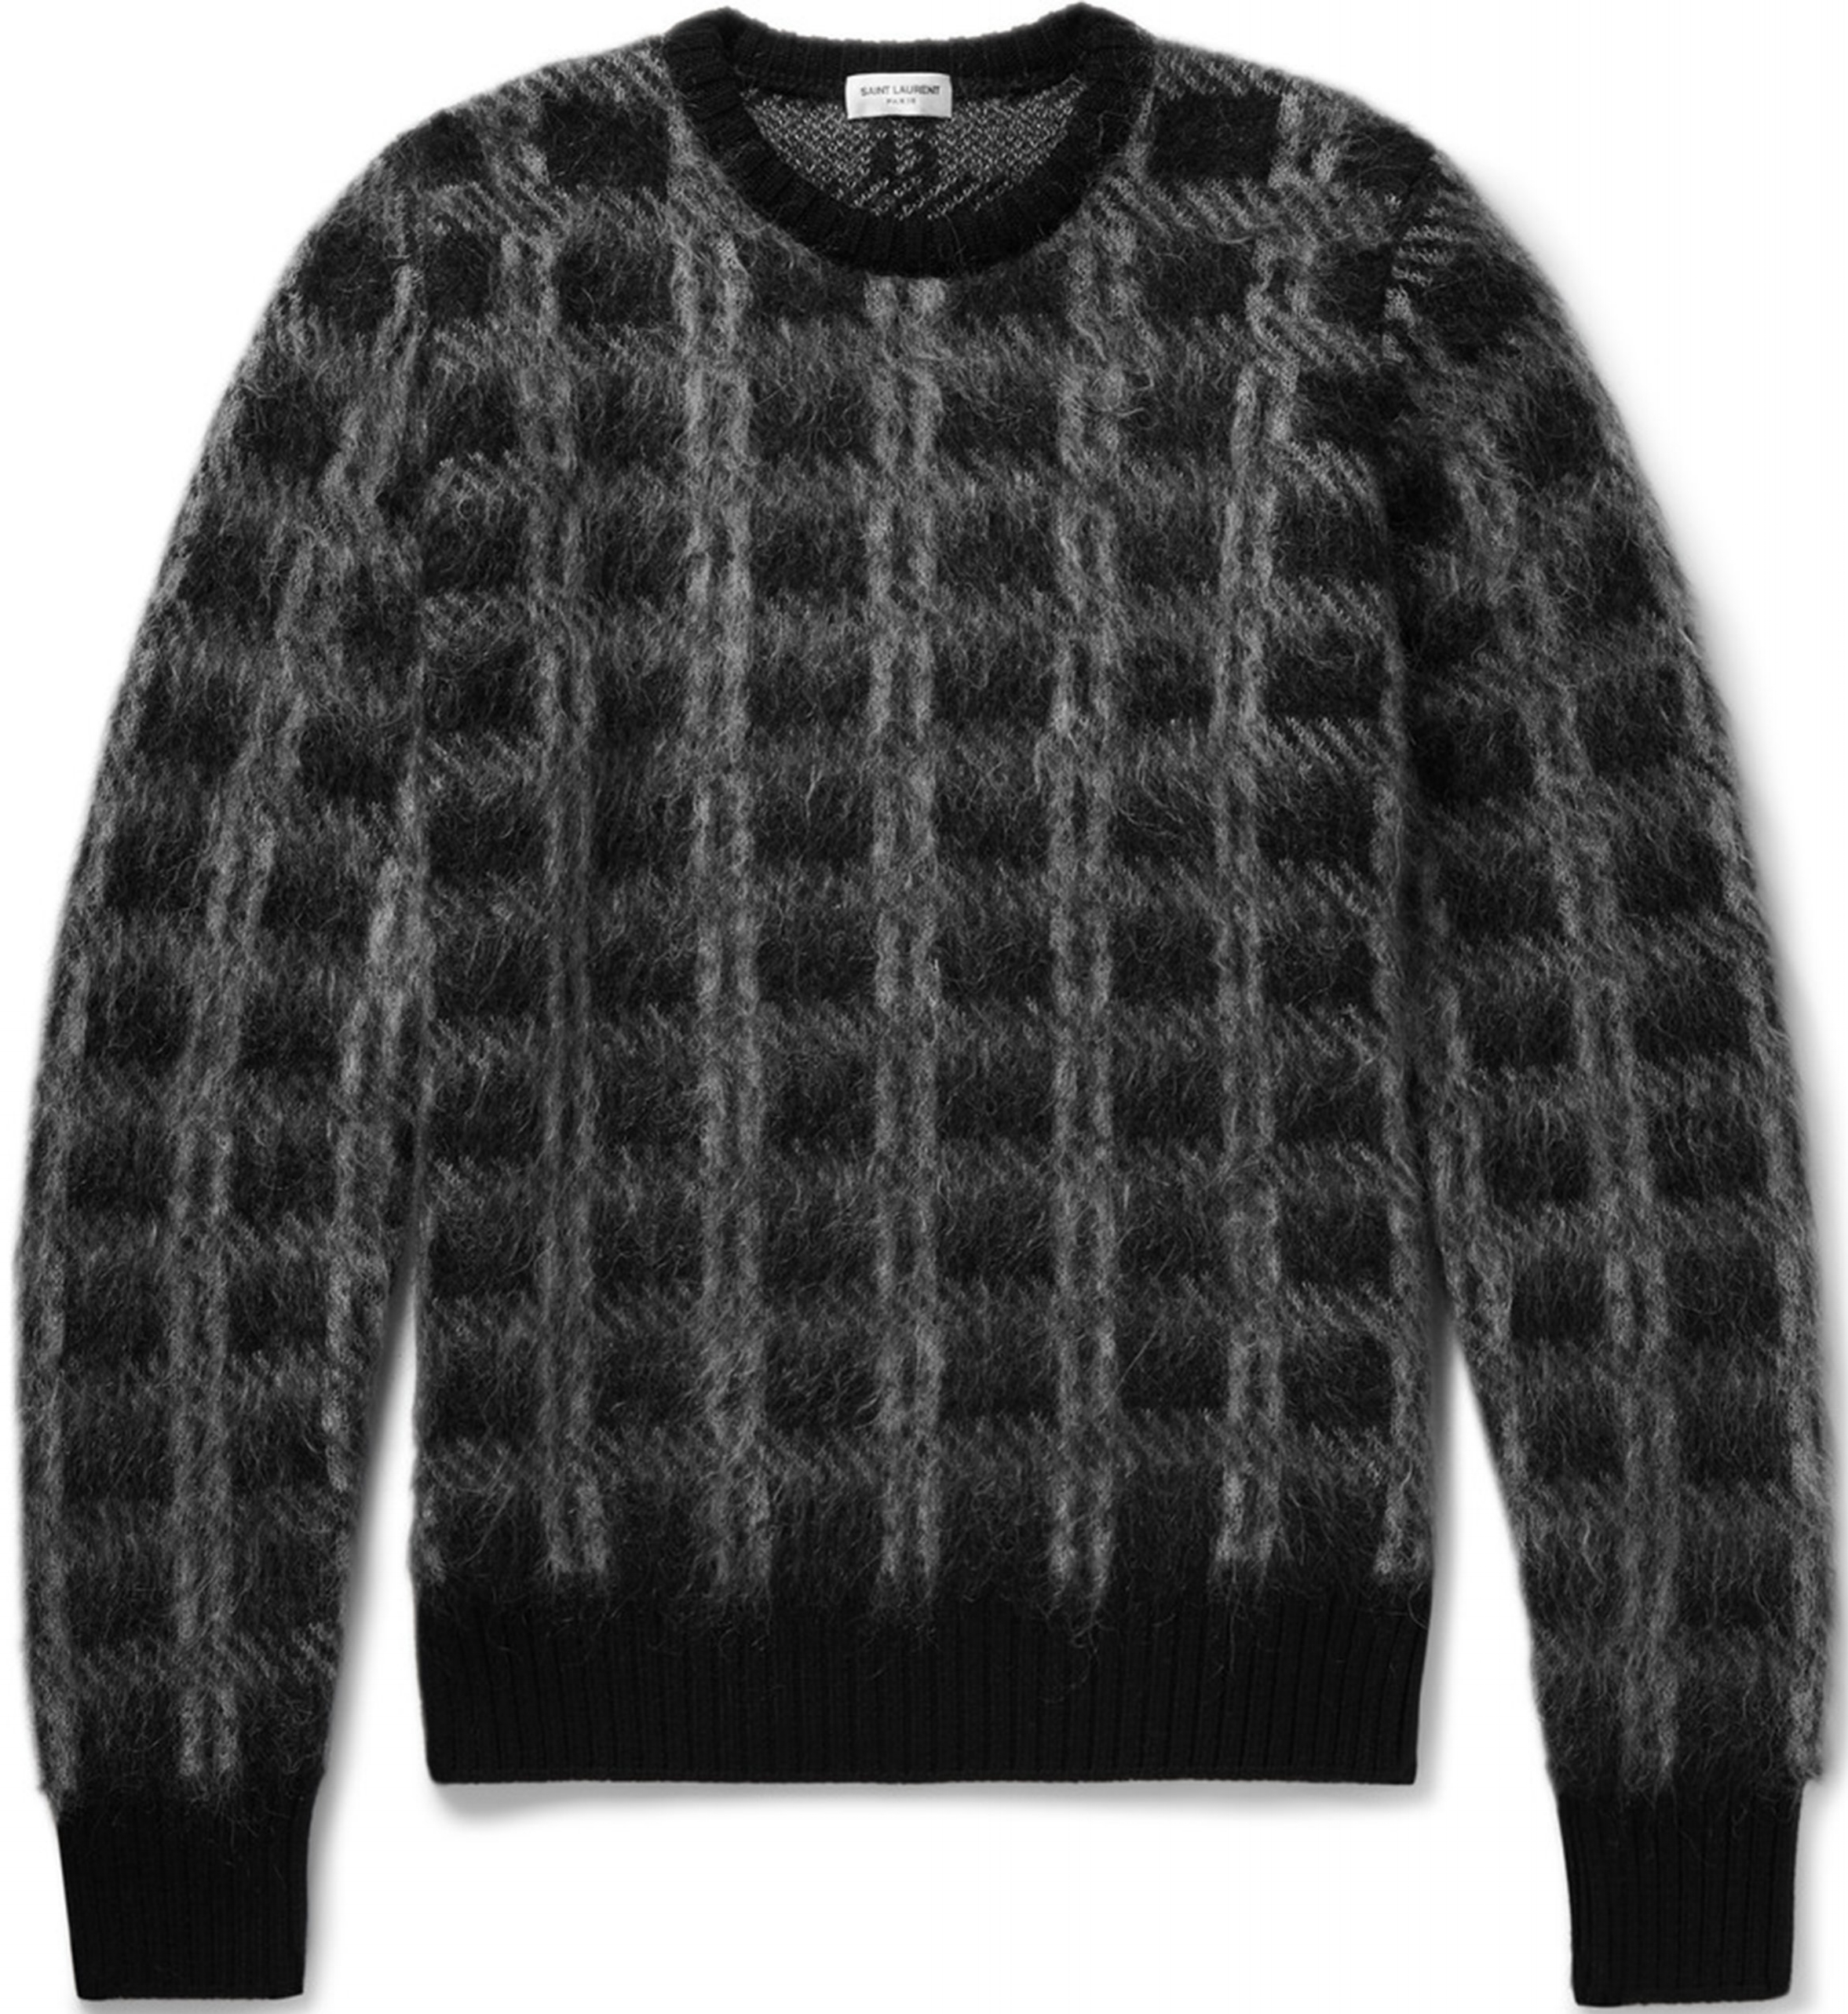 Saint Laurent Slim-Fit Checked Brushed Knitted Sweater at Mr. Porter, $790